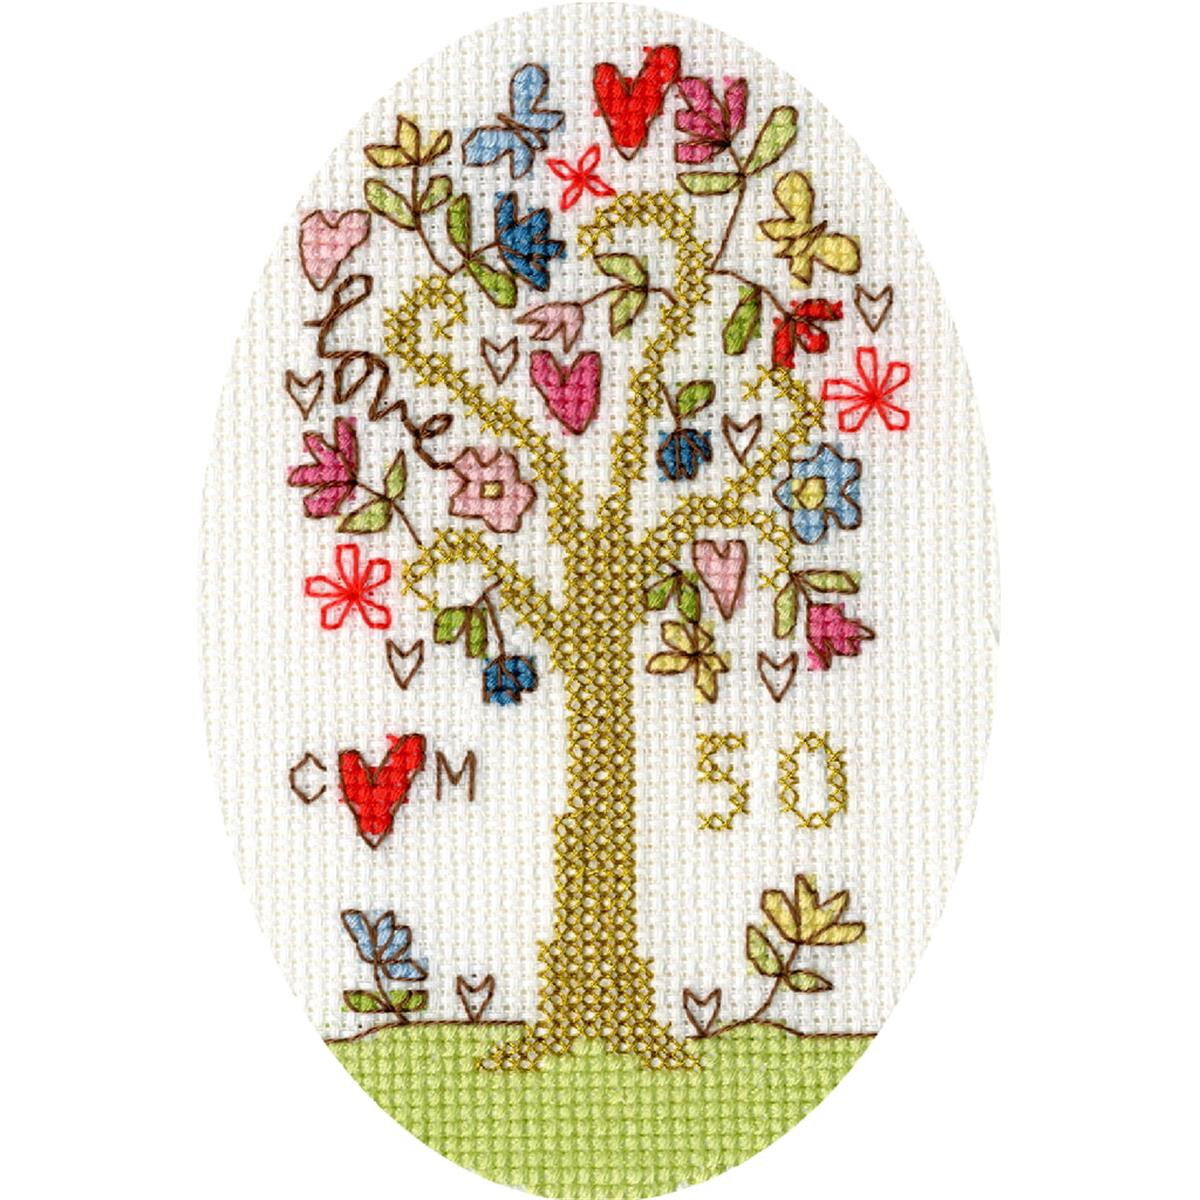 An embroidery of a tree with colorful flowers and hearts...